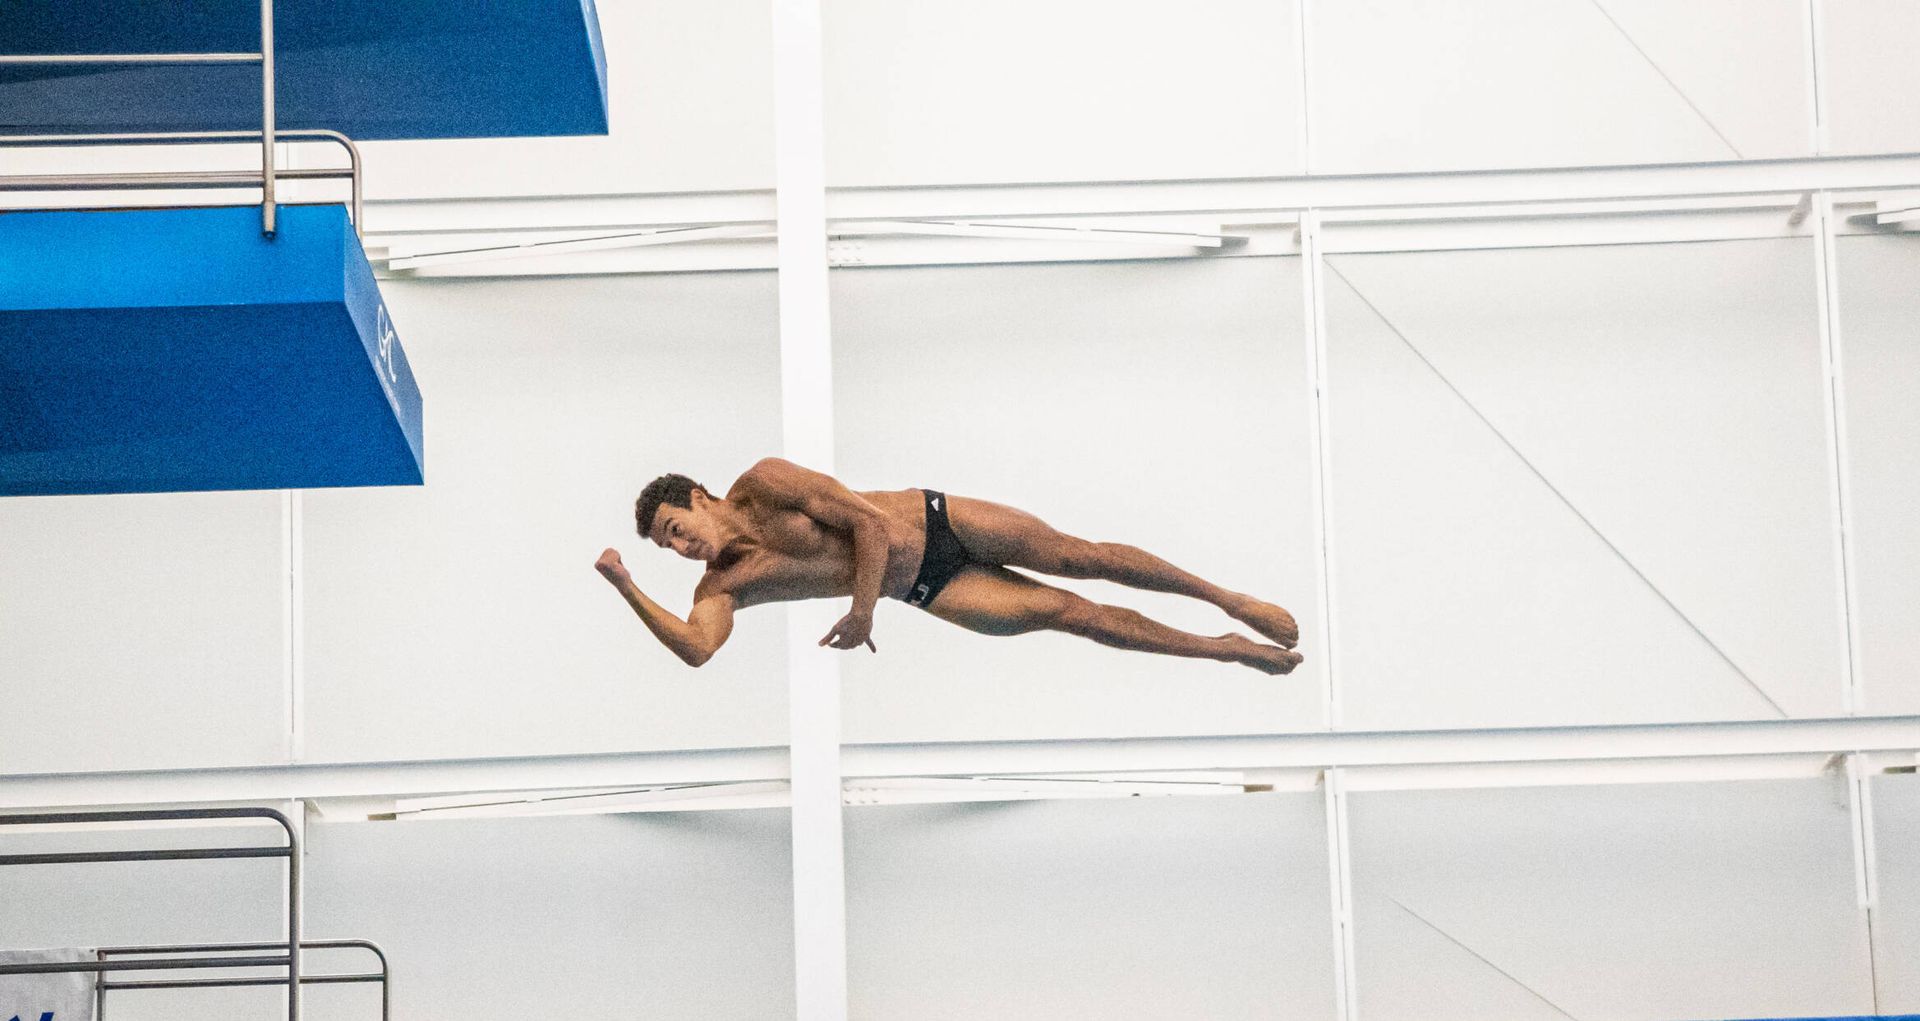 Farouk, Flory, & Scapens Compete at 2023 NCAA Men’s Diving Championships